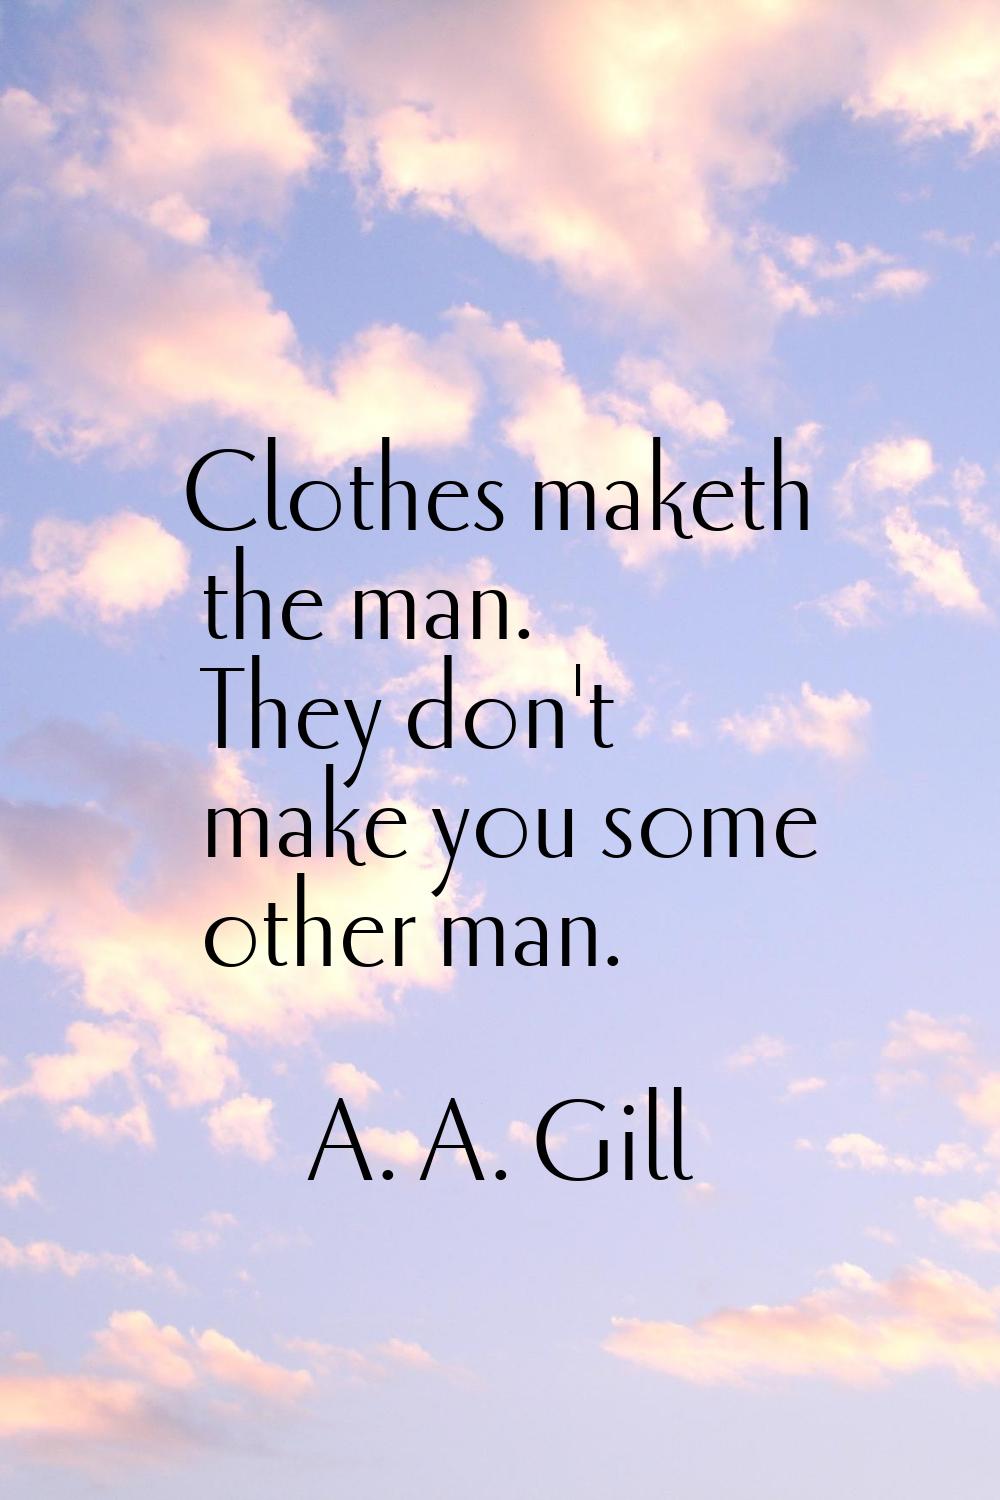 Clothes maketh the man. They don't make you some other man.